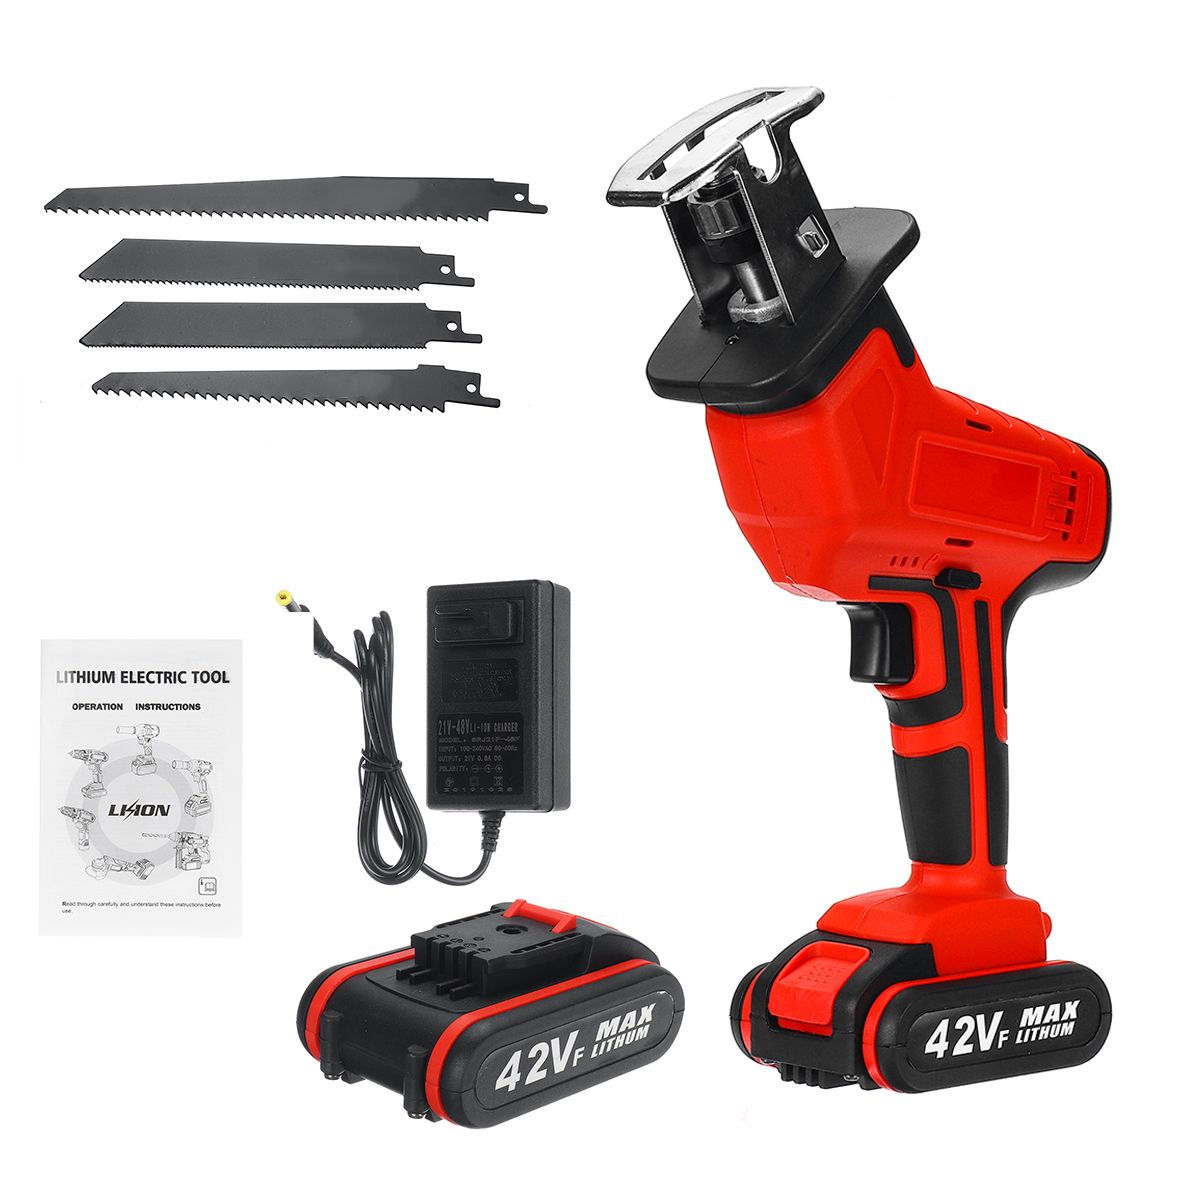 42V-1400W-Electric-Cordless-Reciprocating-Saw-Outdoor-Woodworking-W-2-Battery-1713373